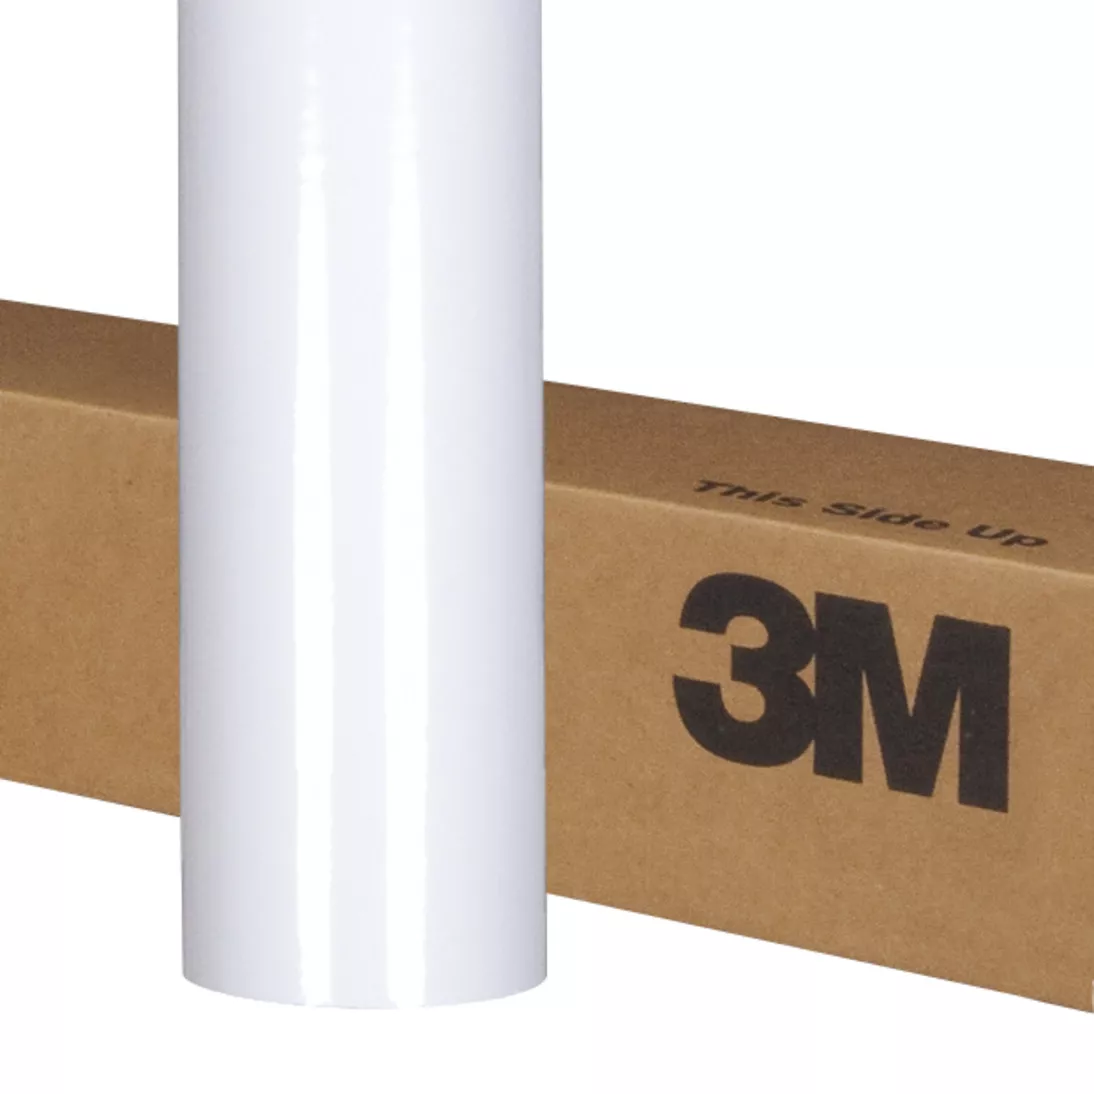 3M™ Scotchcal™ Graphic Film 3470, White, 36 in x 50 yd